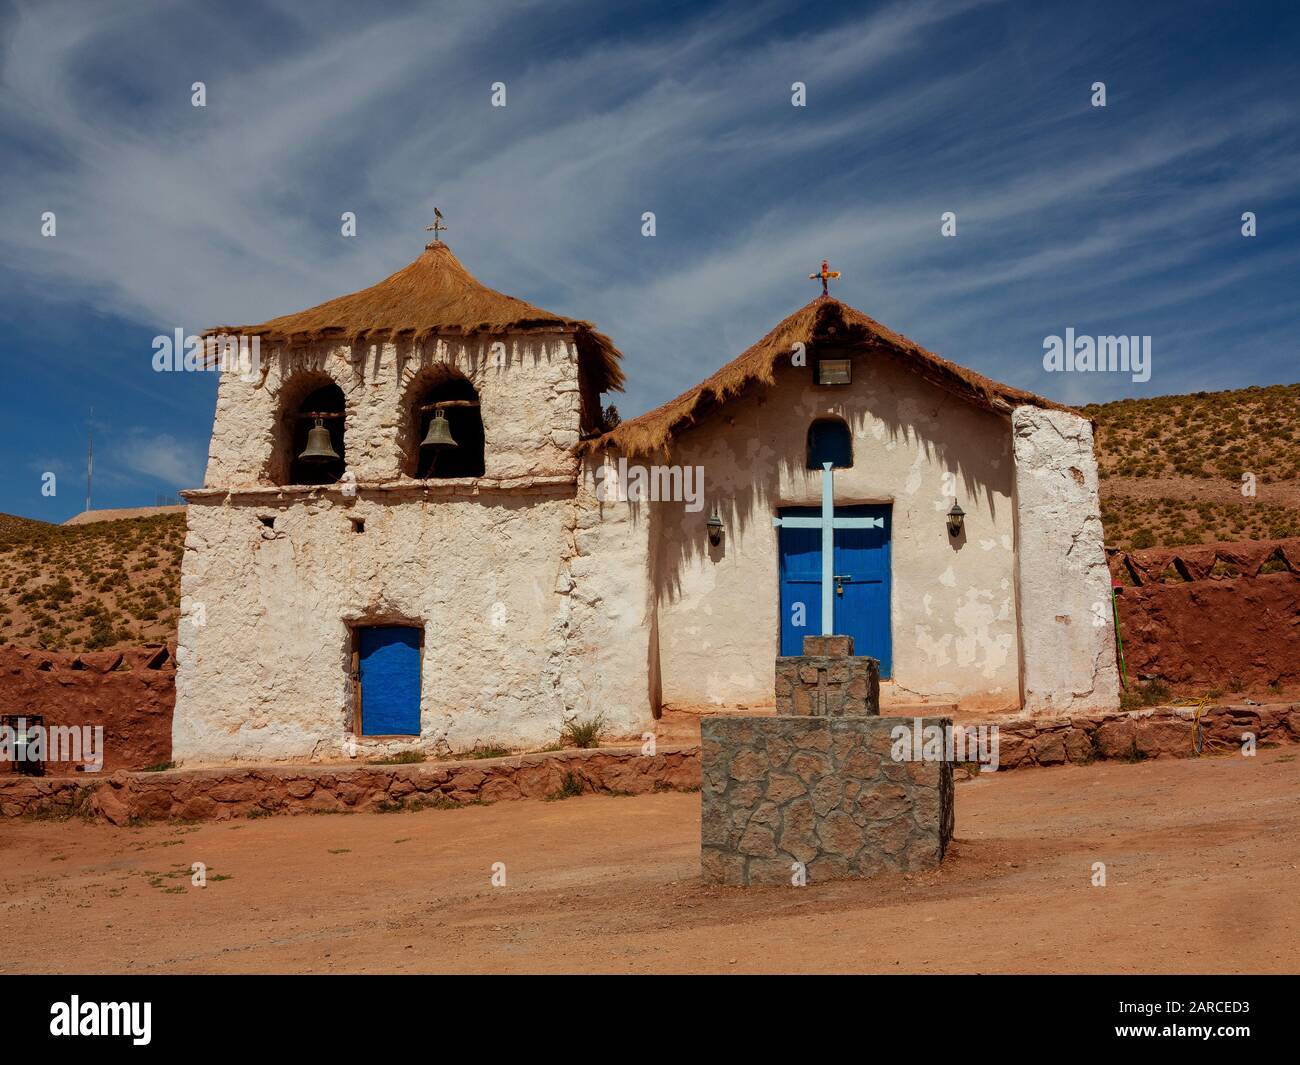 Old church with a typical Andean architecture Machuca Village, Atacama Desert, Chile Stock Photo